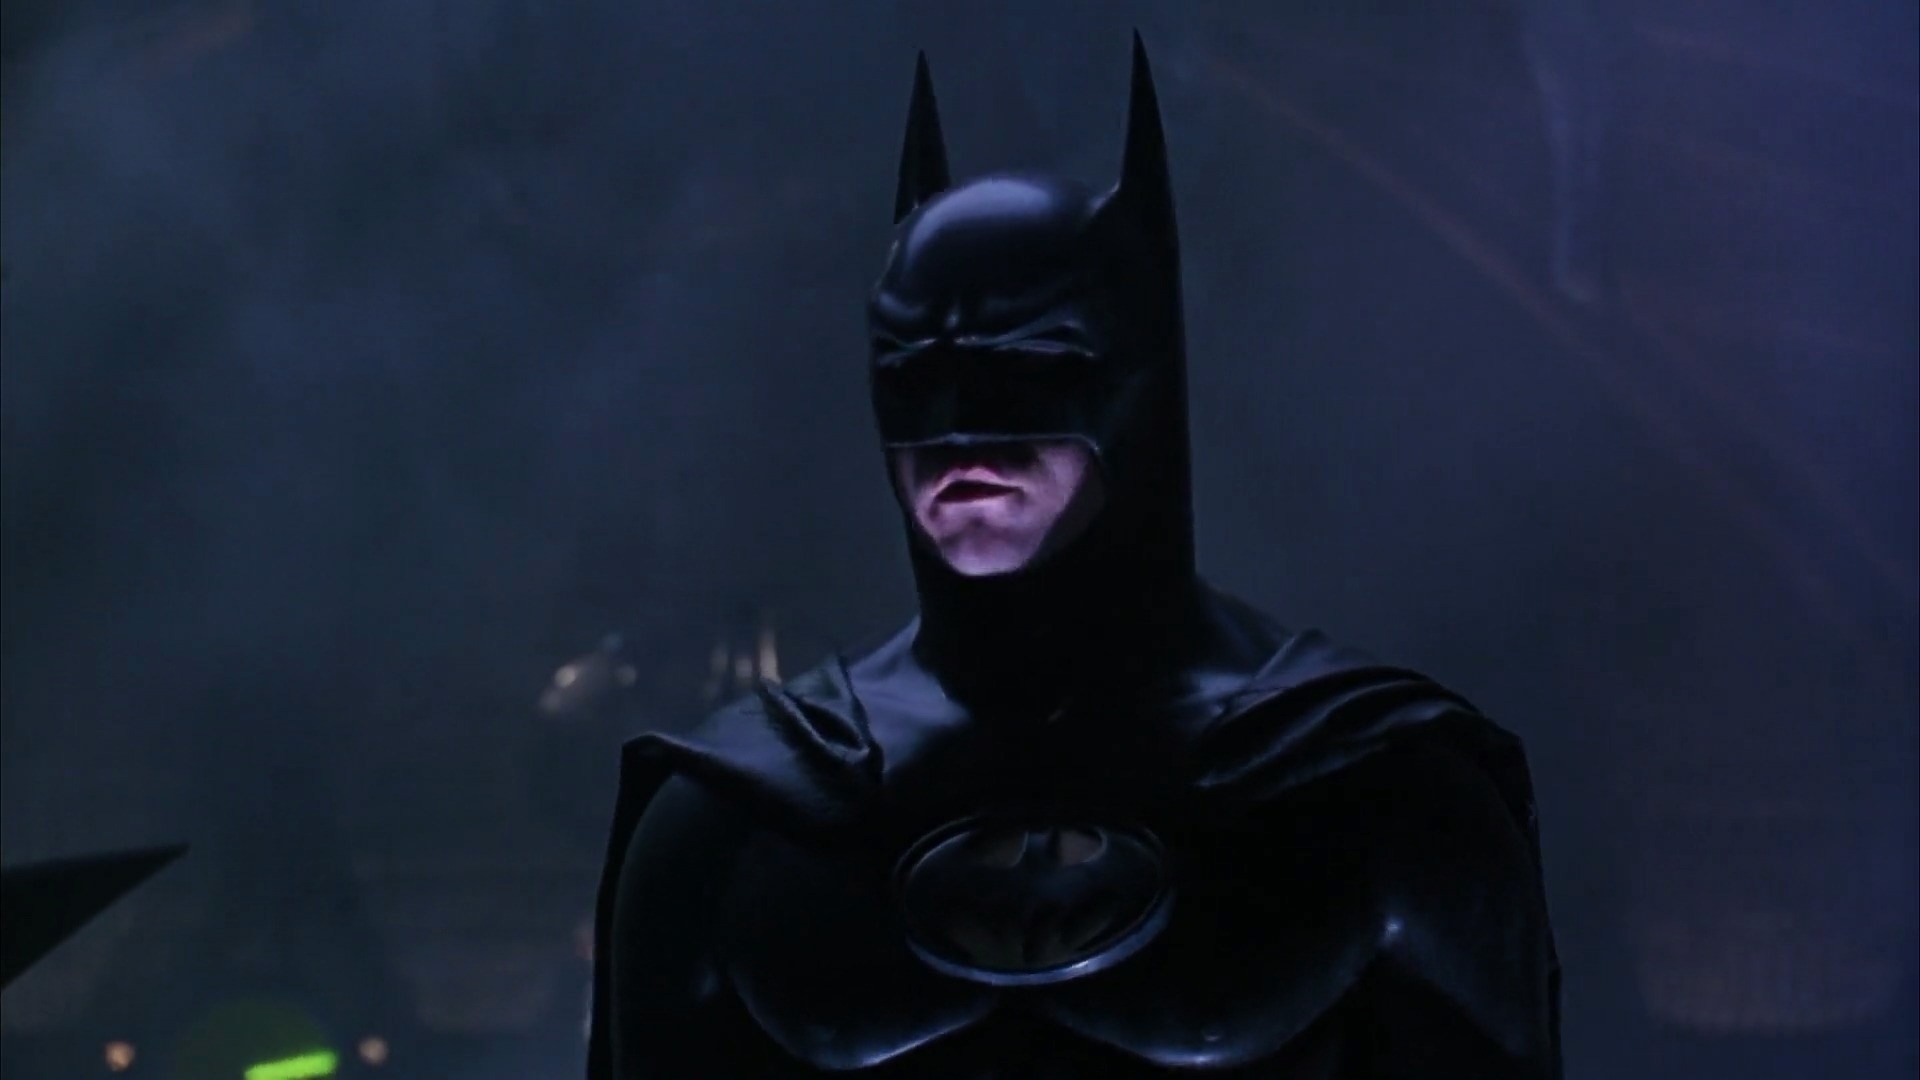 Person in a Batman costume with cowl, cape, and emblem, standing with a serious expression